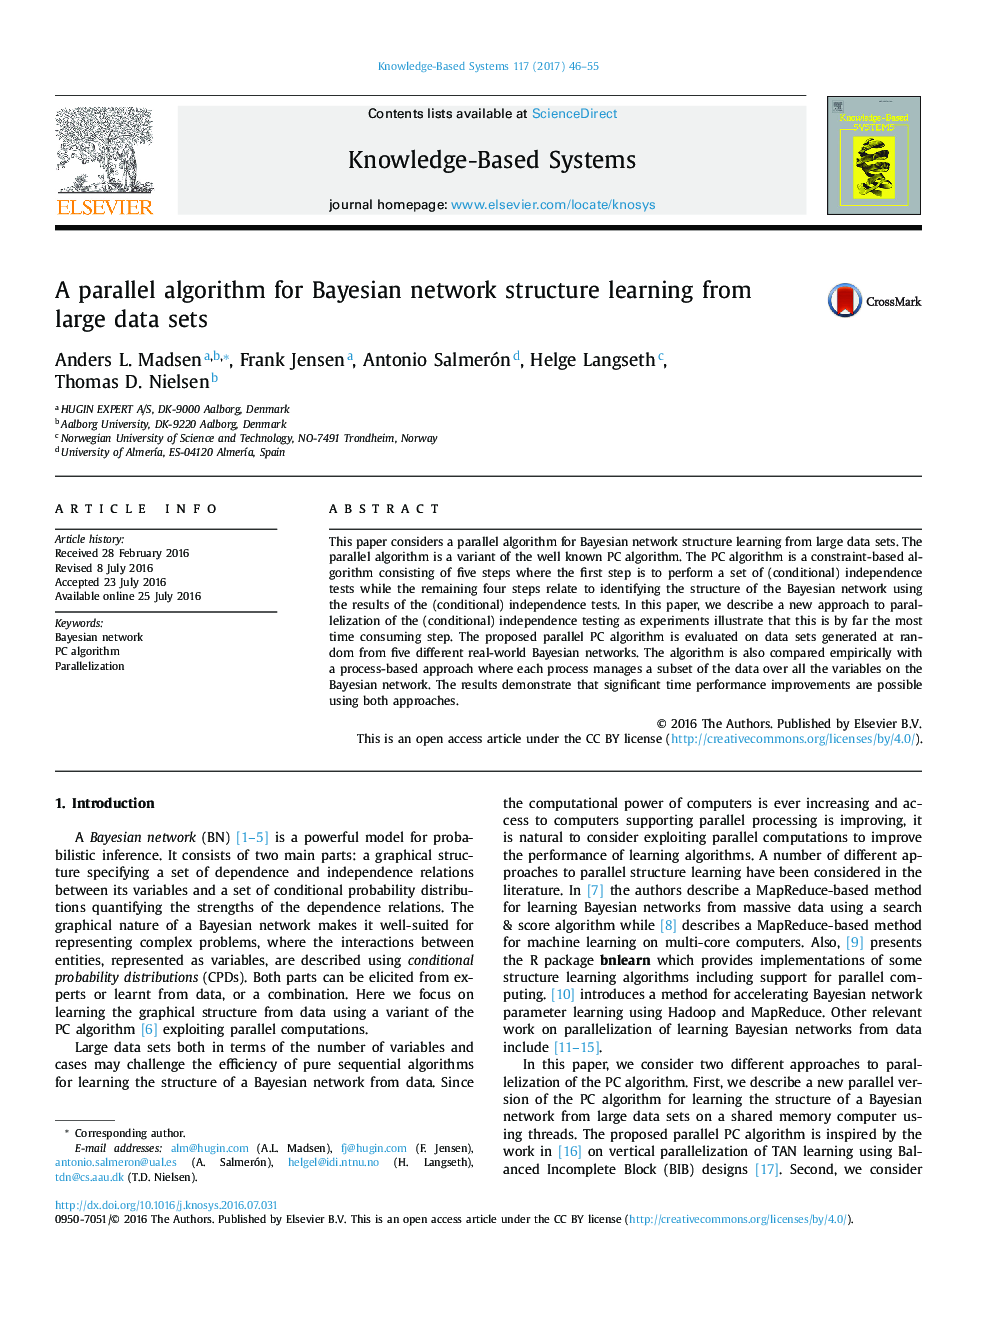 A parallel algorithm for Bayesian network structure learning from large data sets